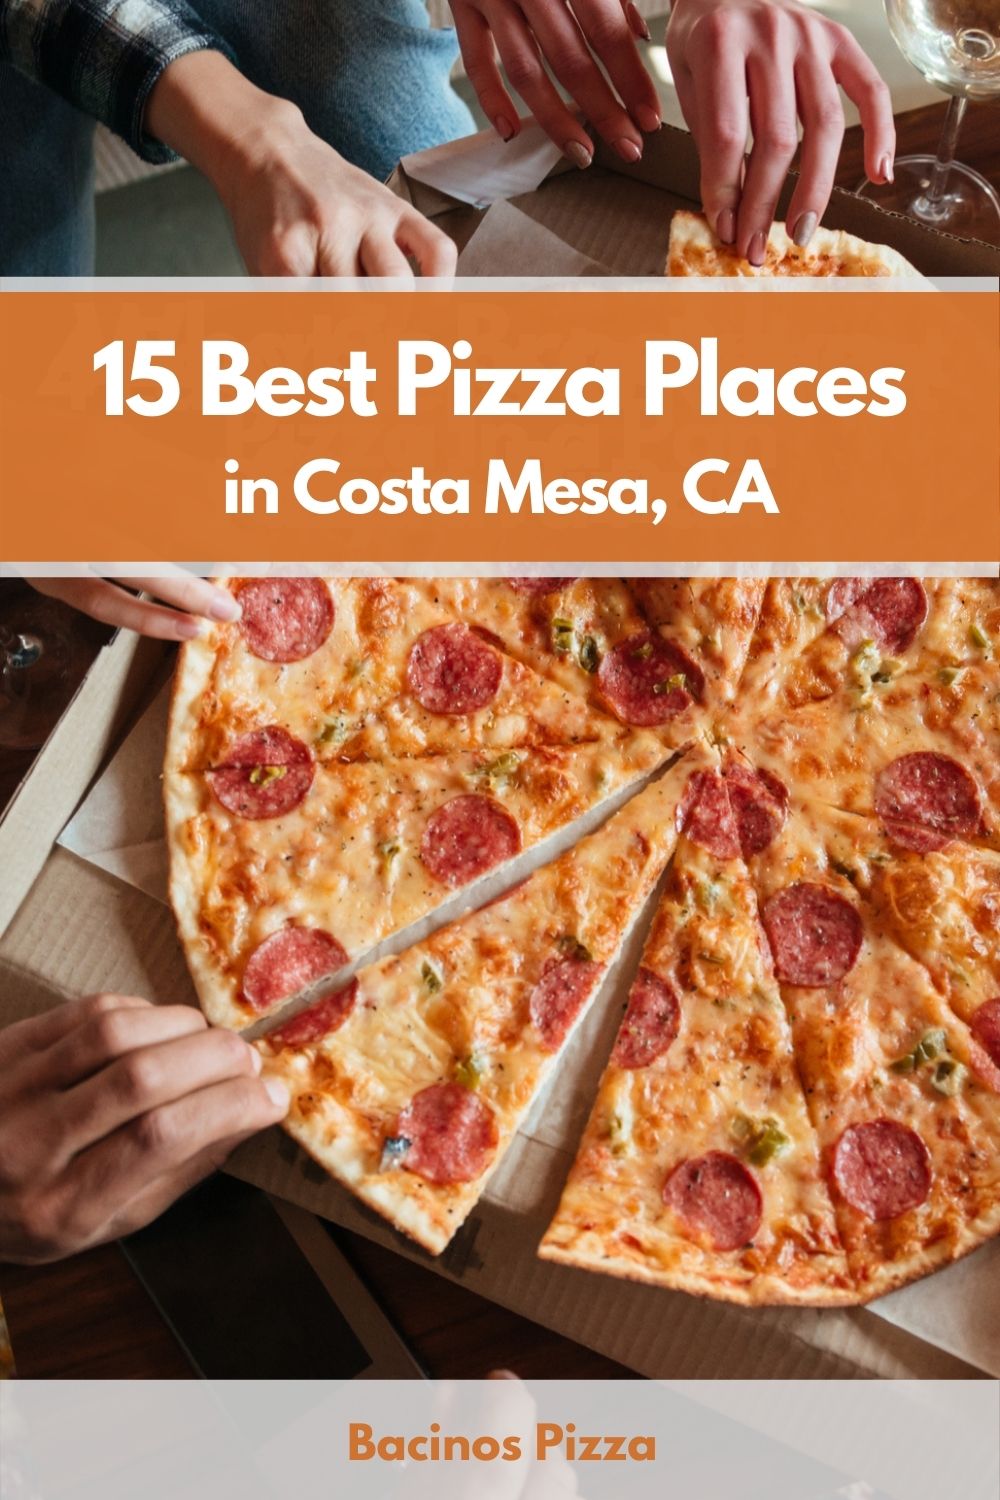 15 Best Pizza Places in Costa Mesa, CA pin 2